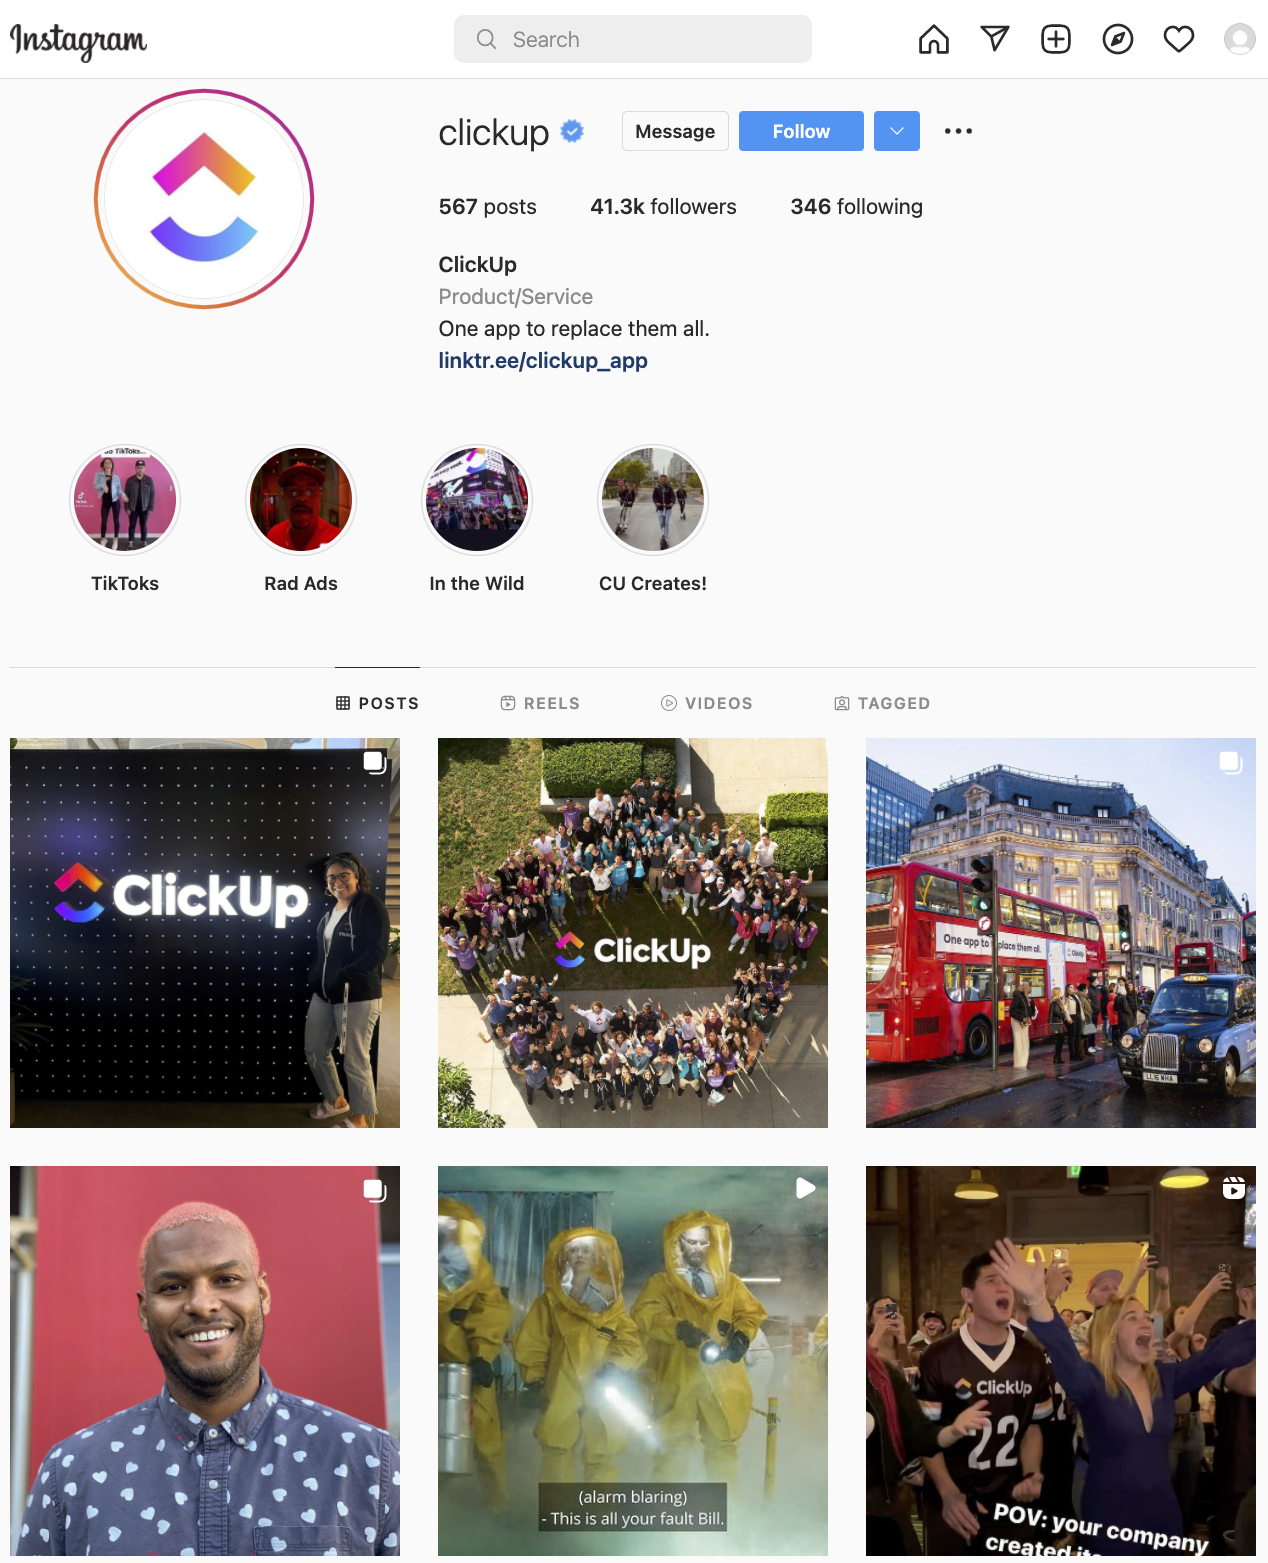 ClickUp Instagram page